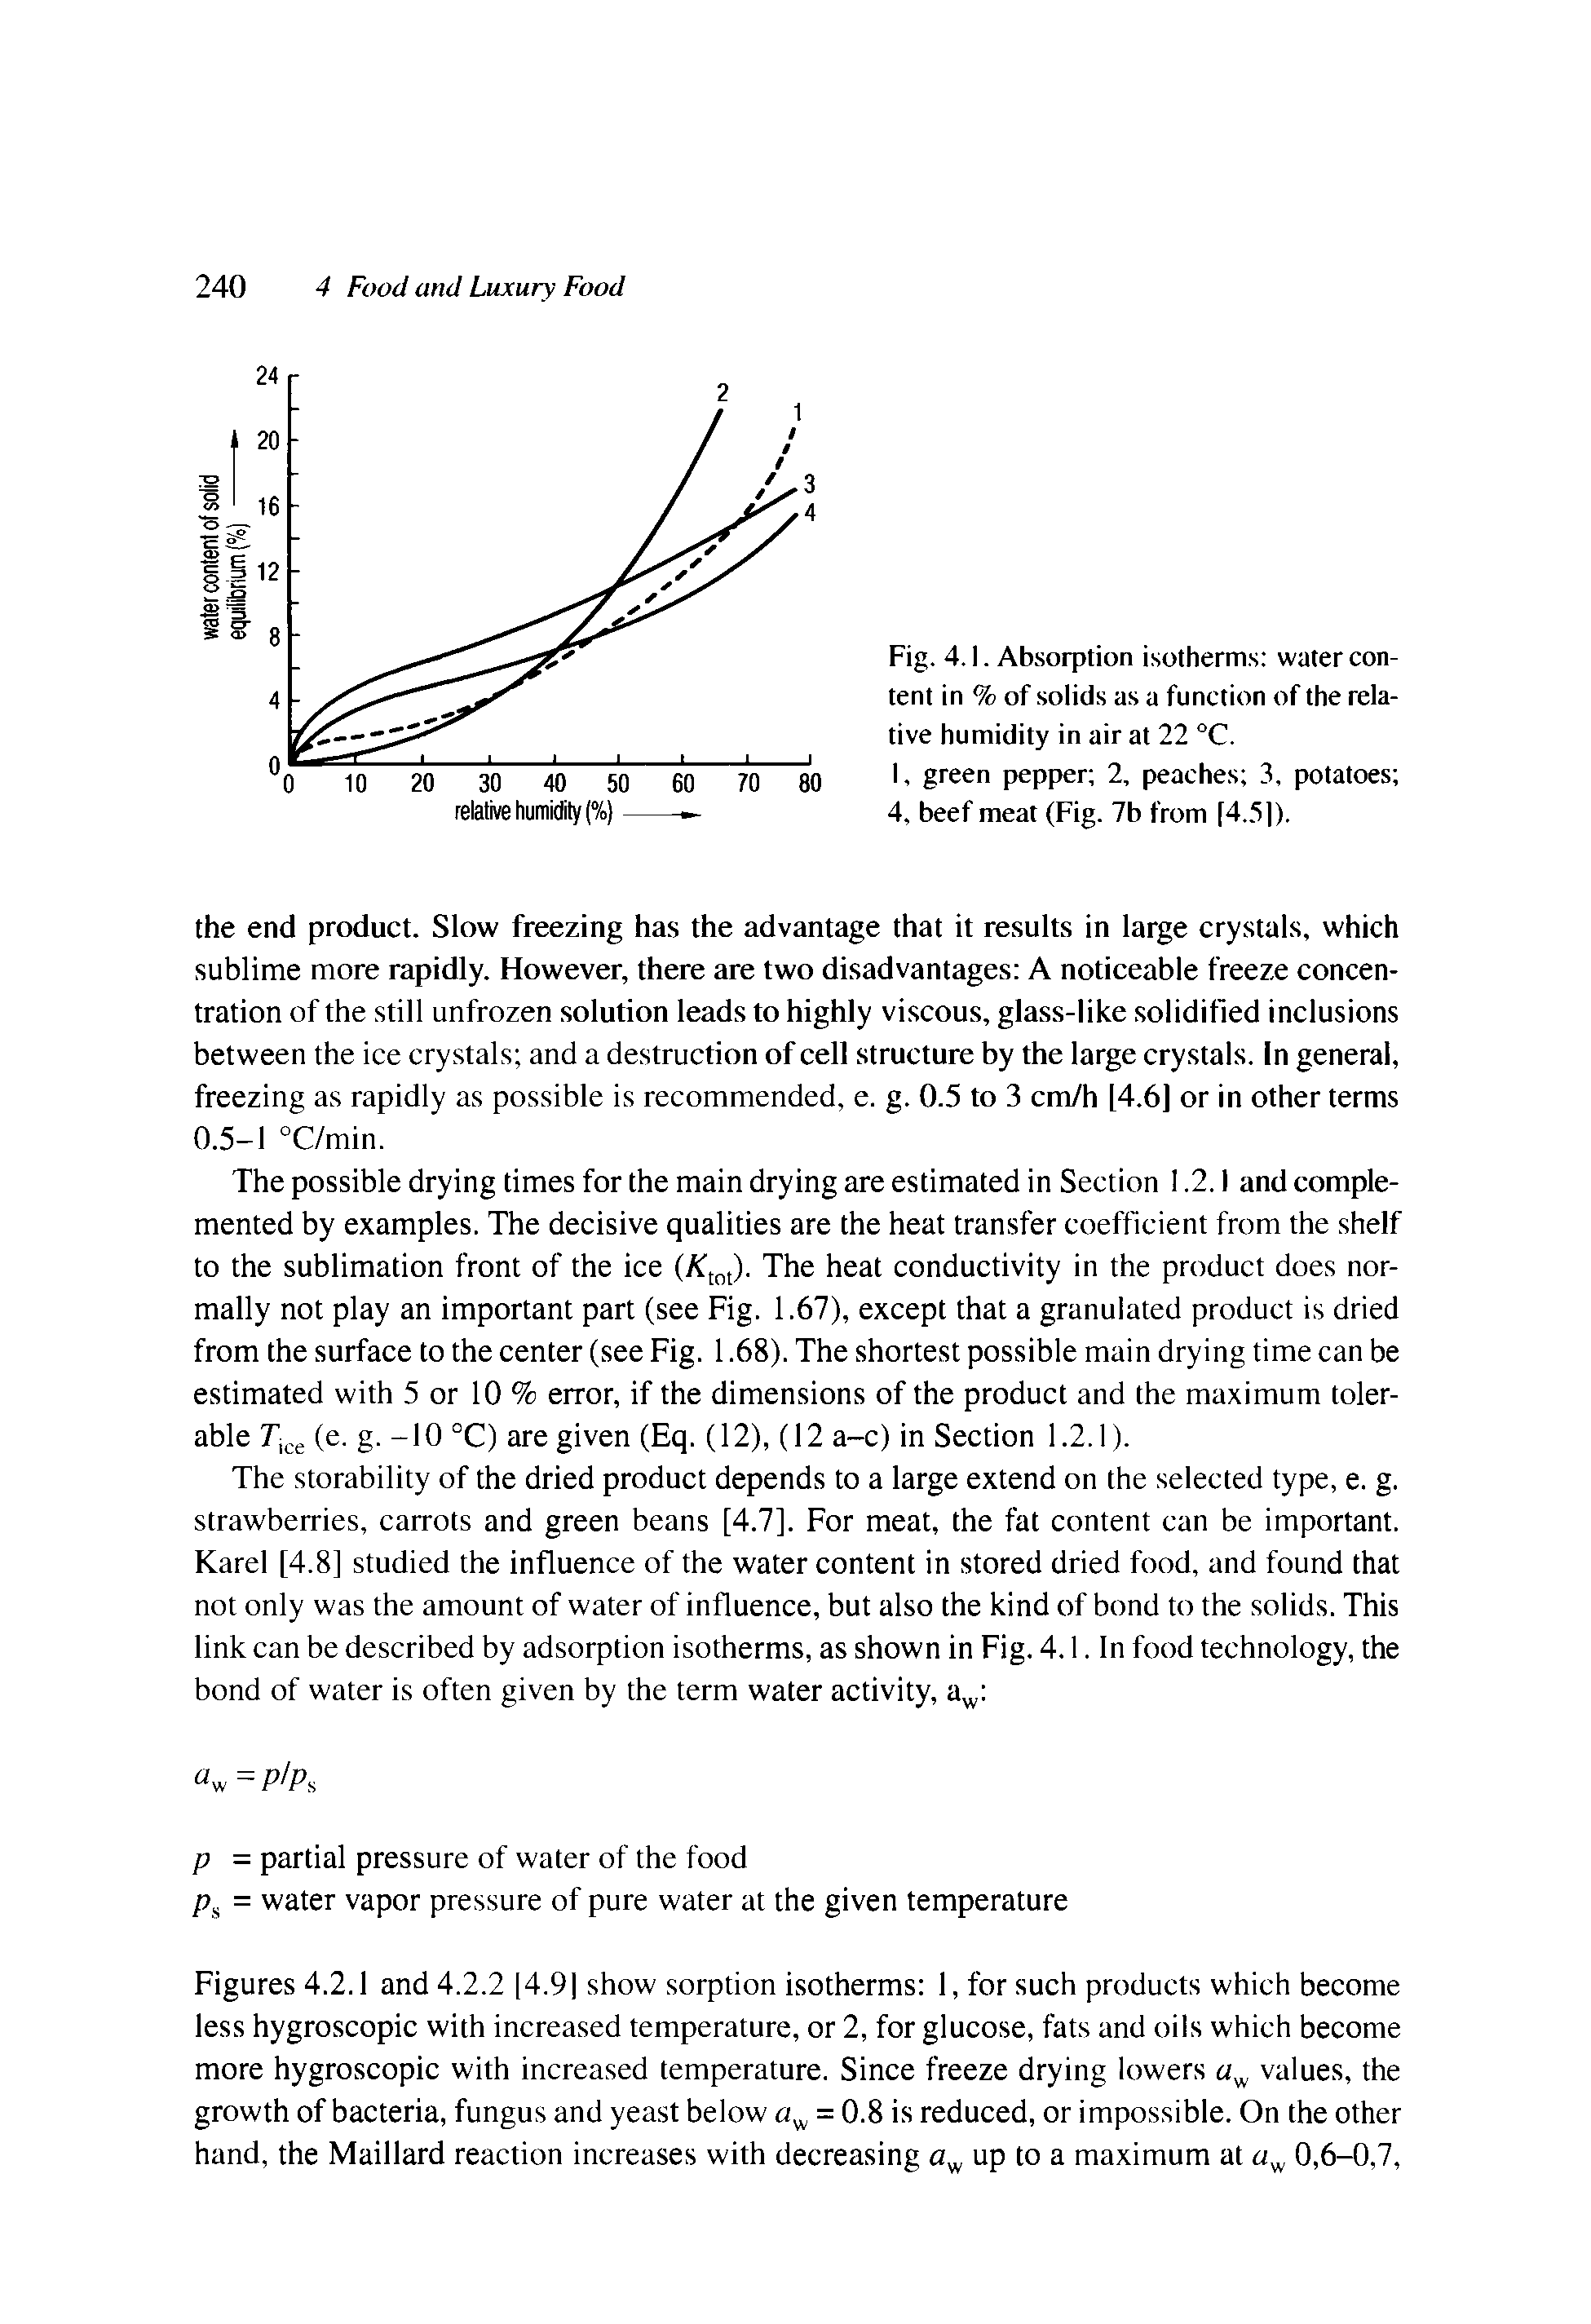 Figures 4.2.1 and 4.2.2 [4.9] show sorption isotherms 1, for such products which become less hygroscopic with increased temperature, or 2, for glucose, fats and oils which become more hygroscopic with increased temperature. Since freeze drying lowers aw values, the growth of bacteria, fungus and yeast below aw = 0.8 is reduced, or impossible. On the other hand, the Maillard reaction increases with decreasing aw up to a maximum at aw 0,6-0,7,...